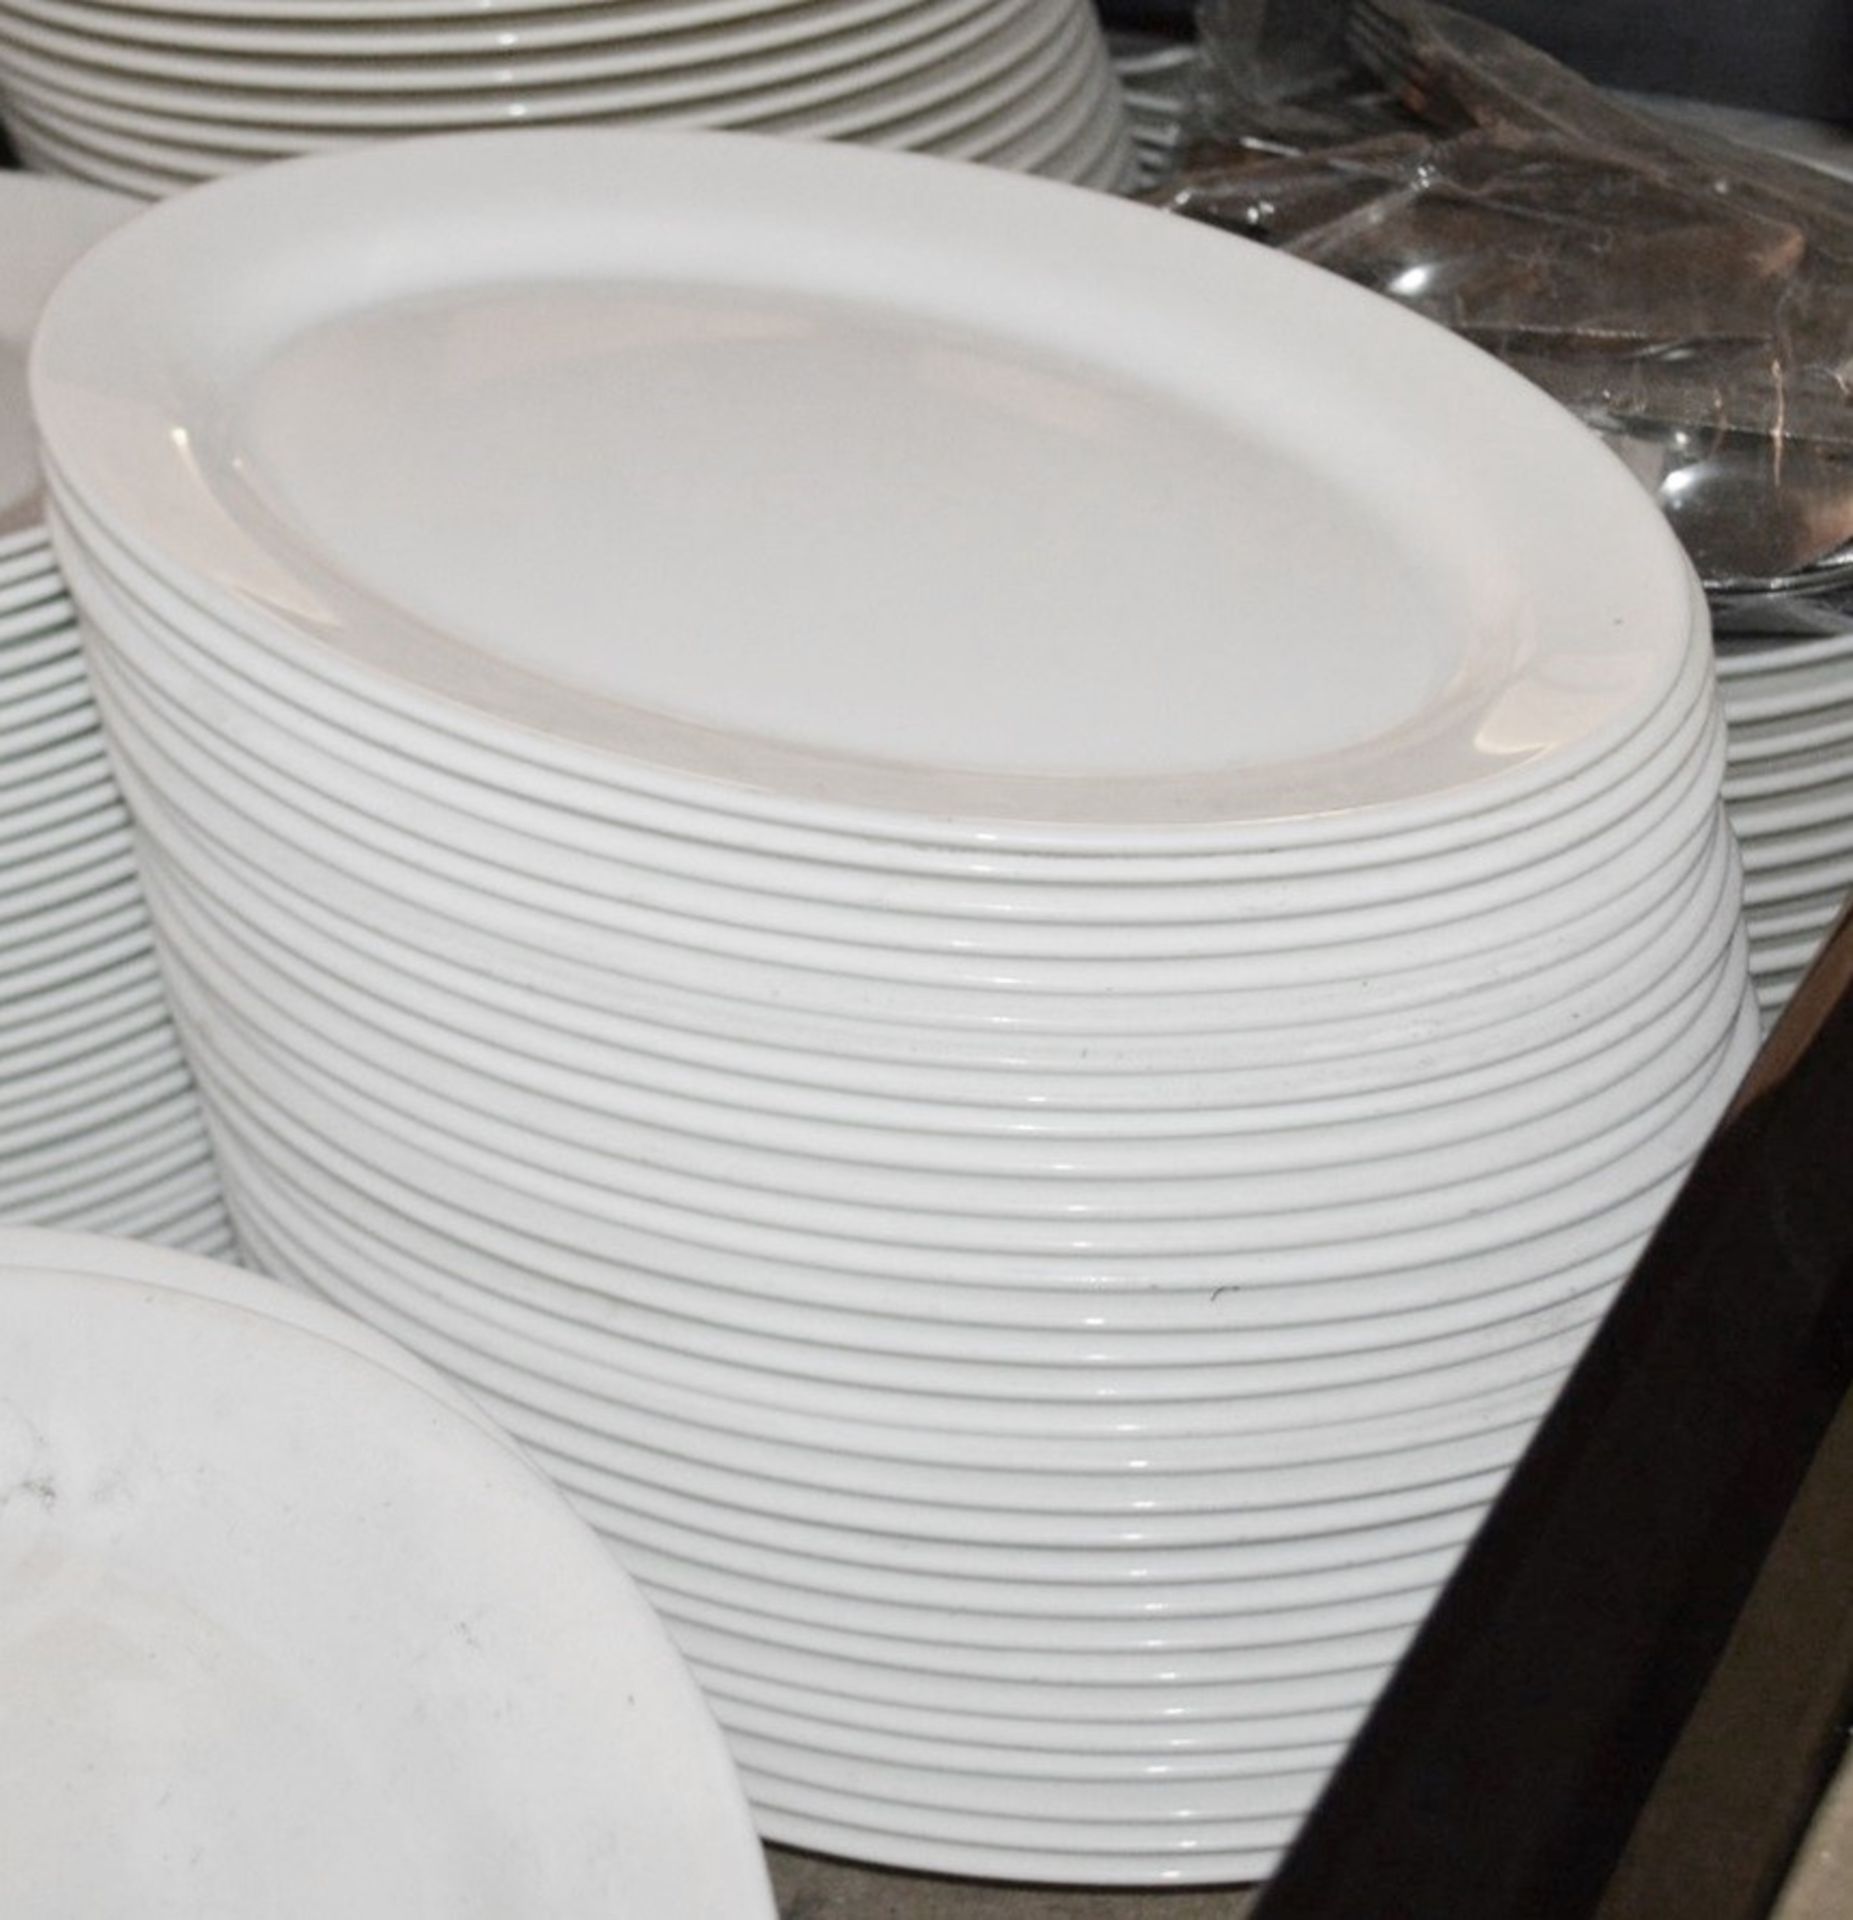 50 x Commercial Oval Dining Platter Plates - Dimensions: 31 x 23cm - Pre-owned, From A London - Image 4 of 4